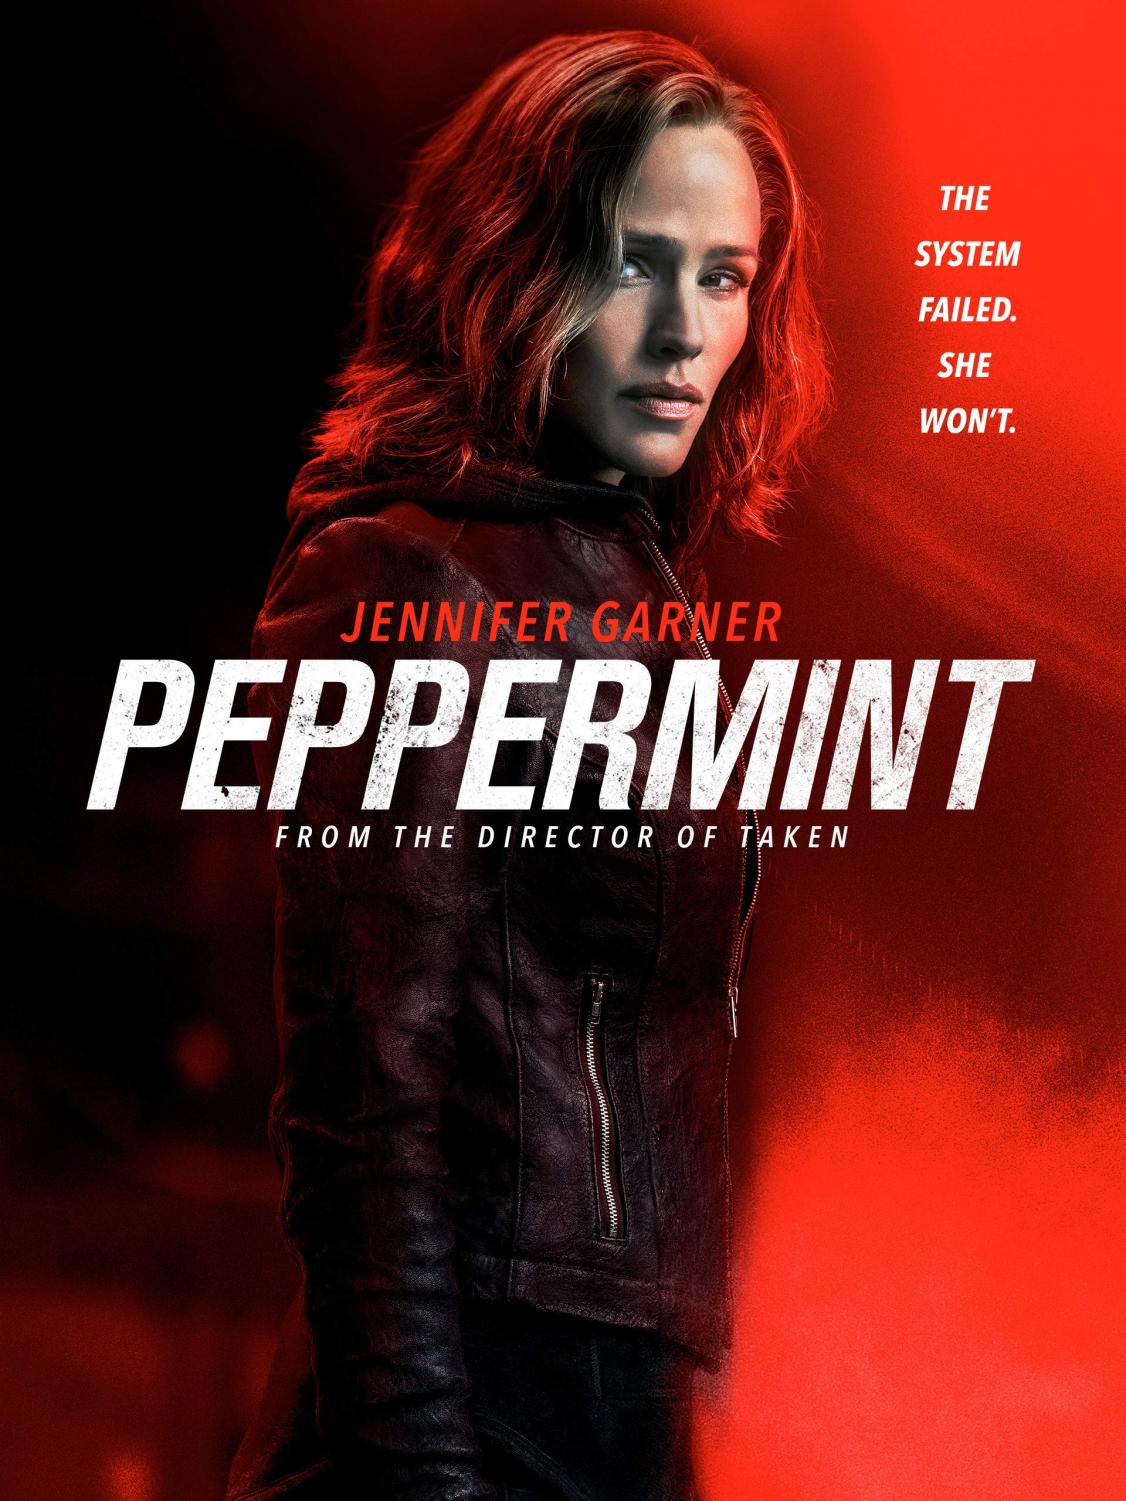 Peppermint” is definitely worth Tales the – Beaver watch